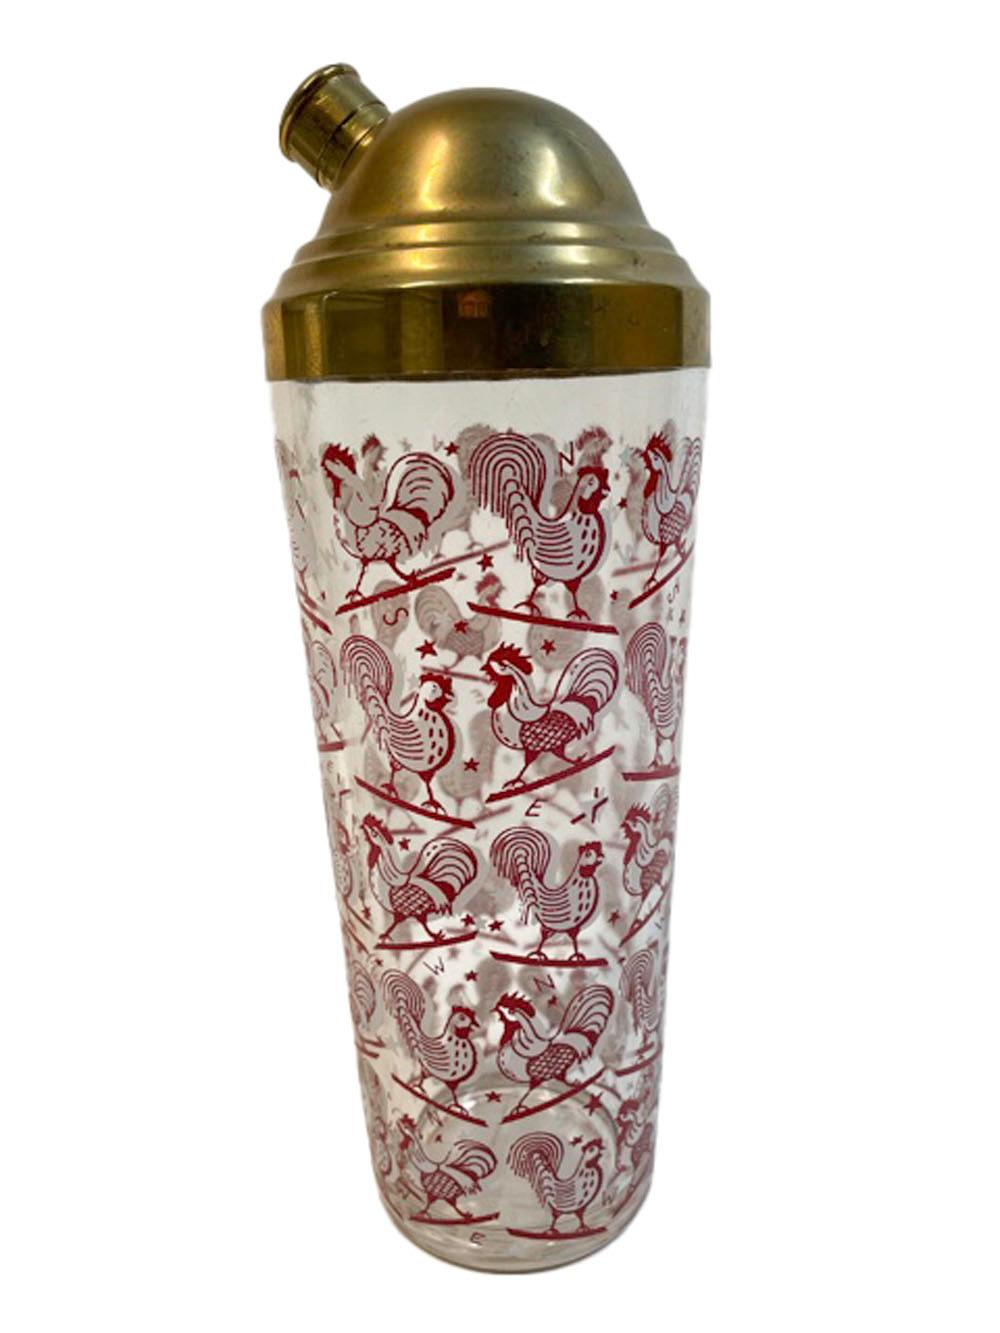 American Art Deco Red and White Rooster Cocktail Shaker